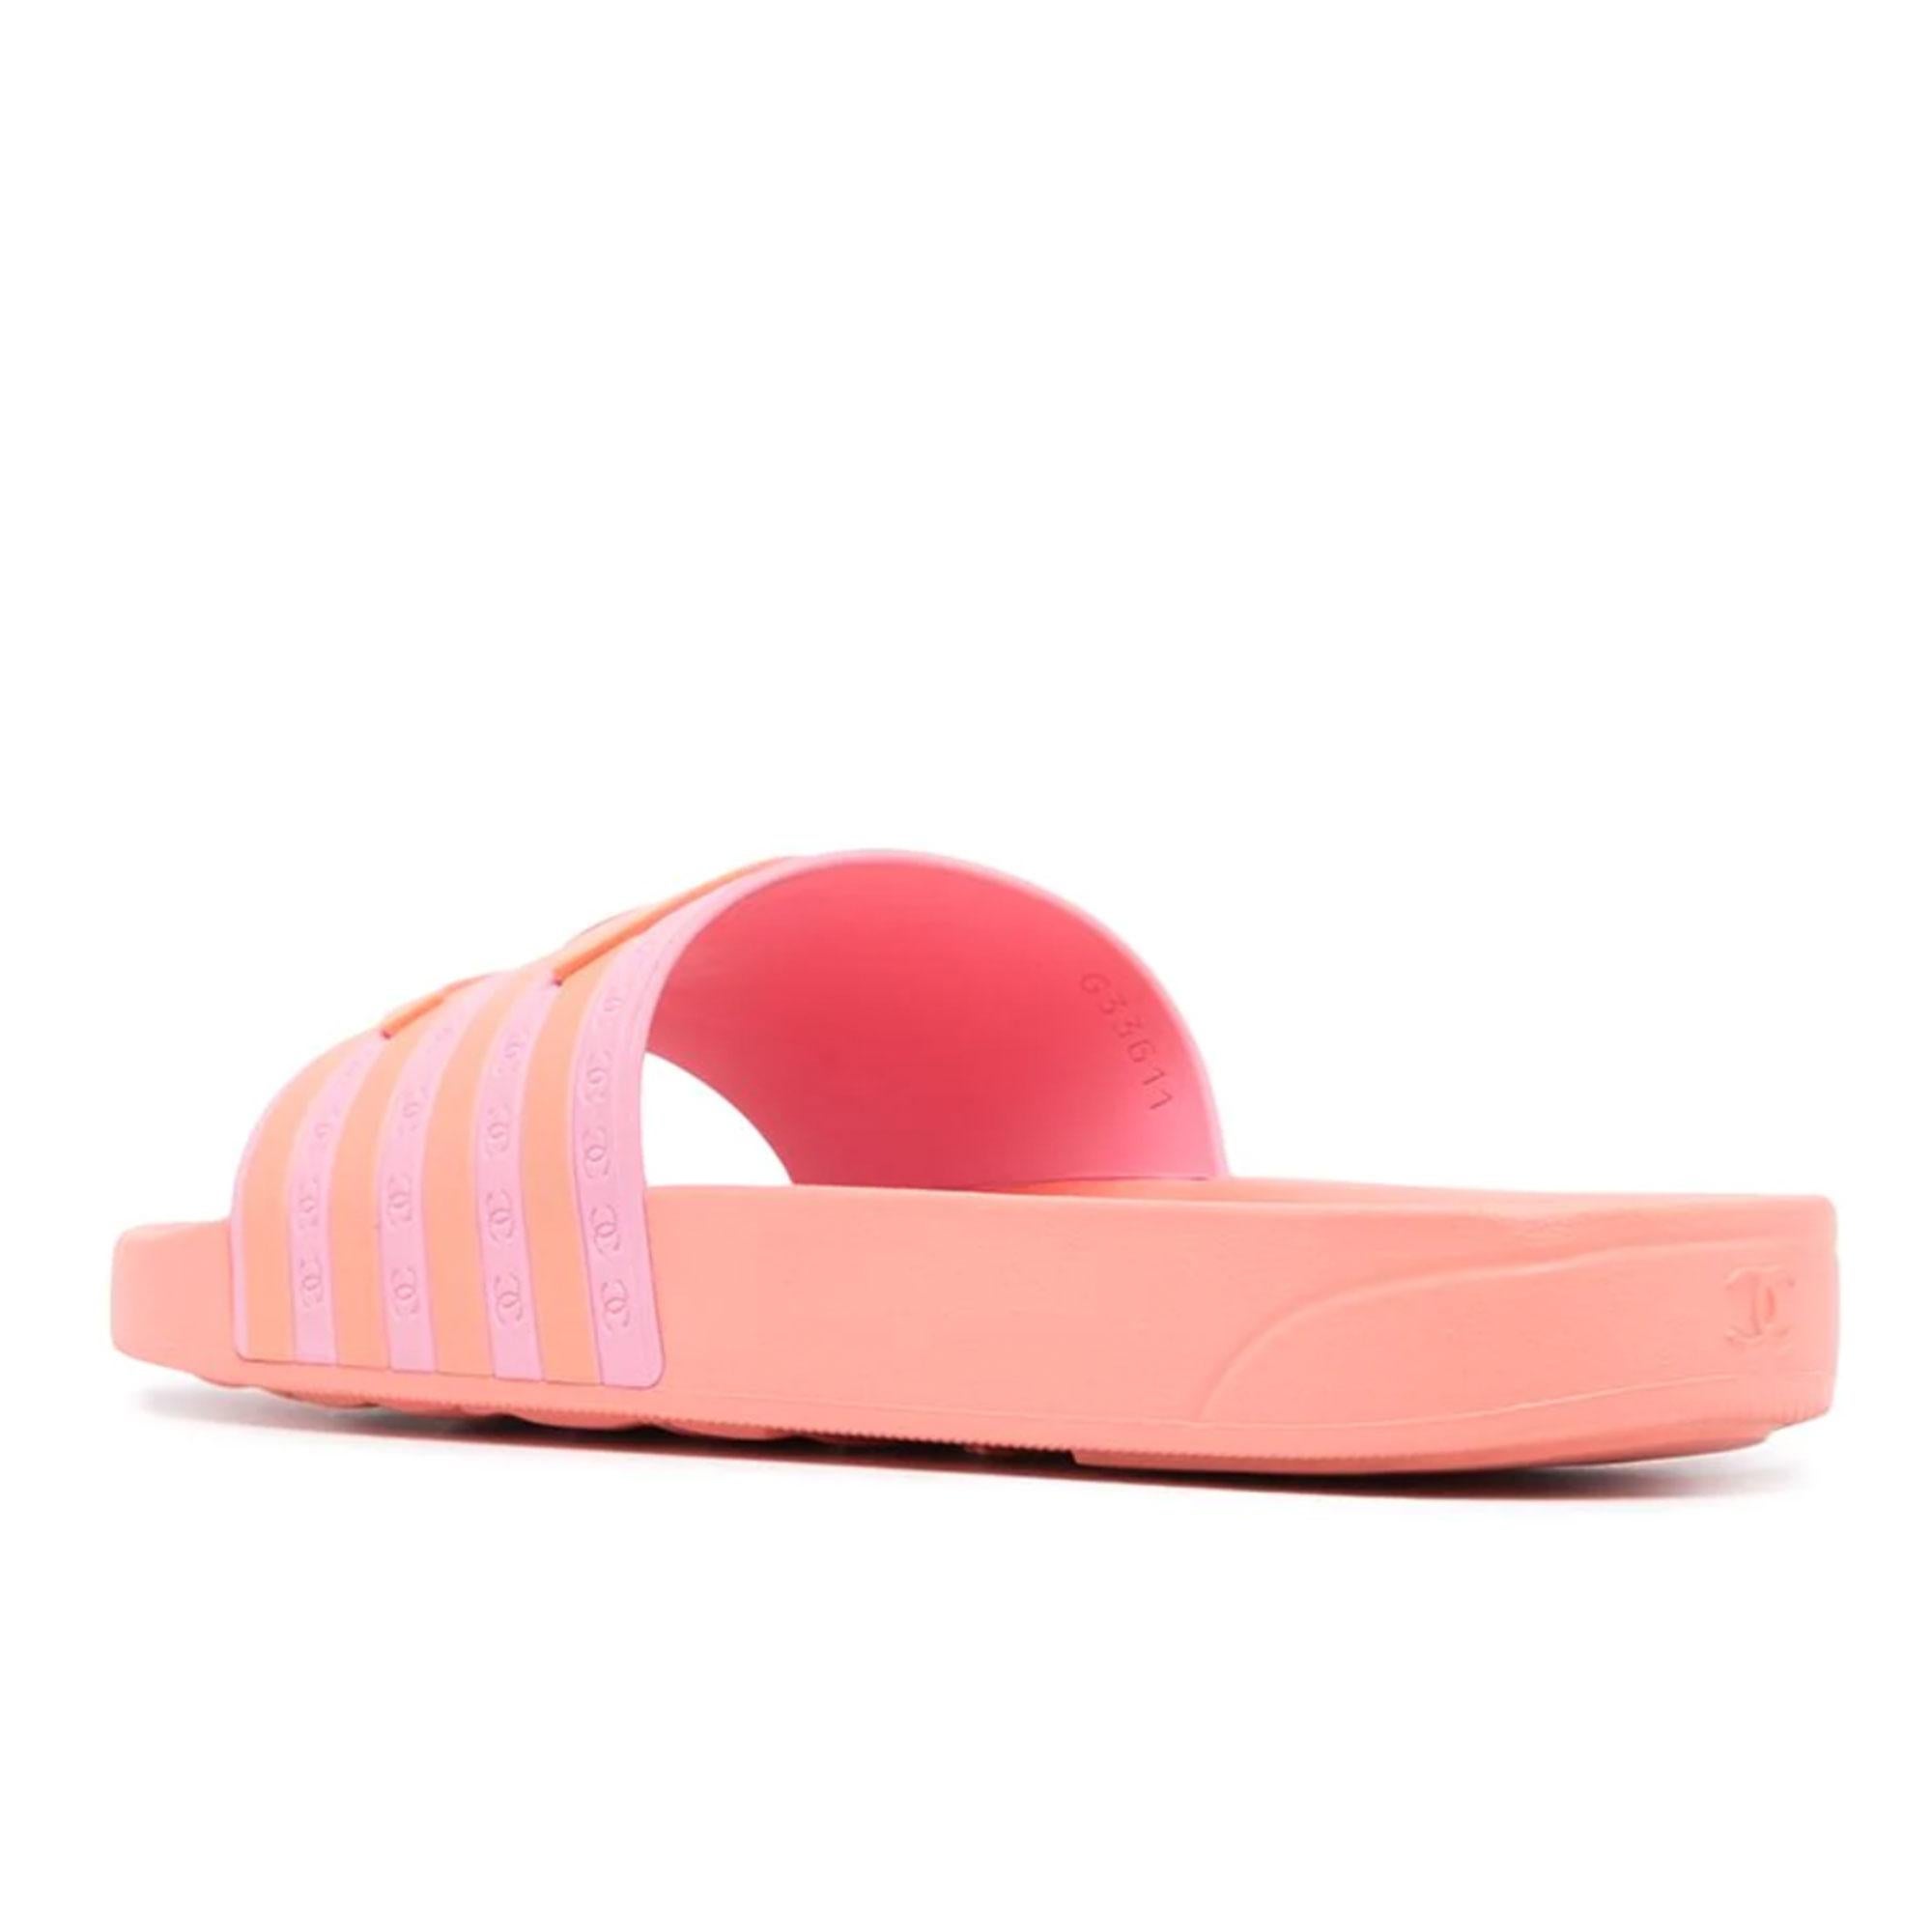 Chanel Cruise Resort Pink Peach Orange Rubber Sandals Slides 

Year: 2018

Size 41

Brand new in box, deadstock